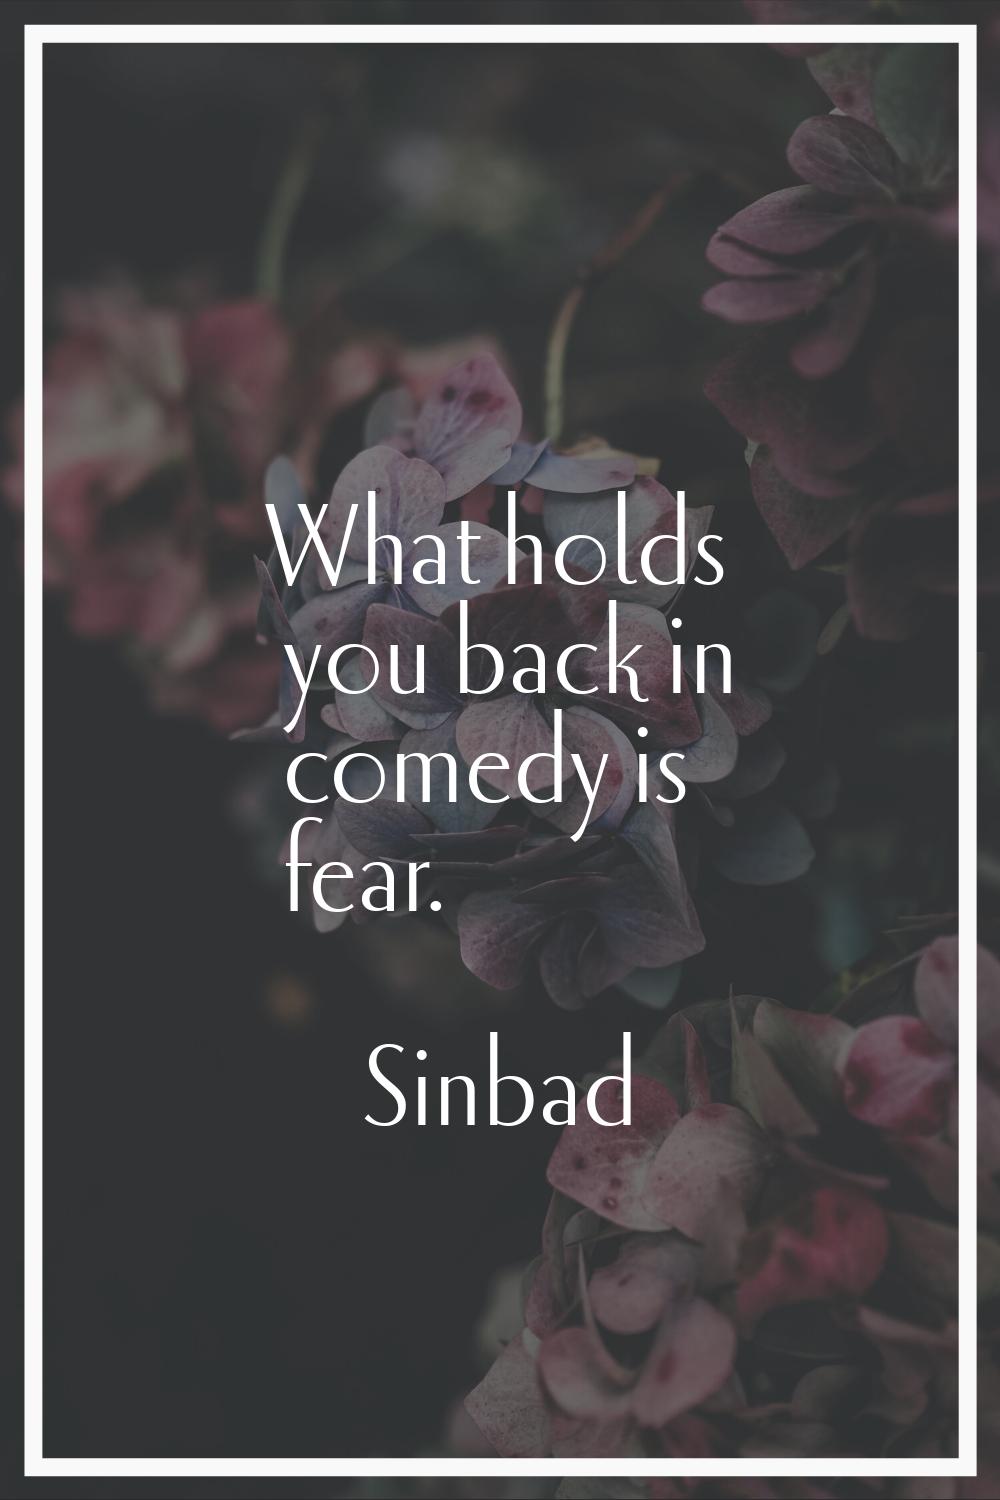 What holds you back in comedy is fear.